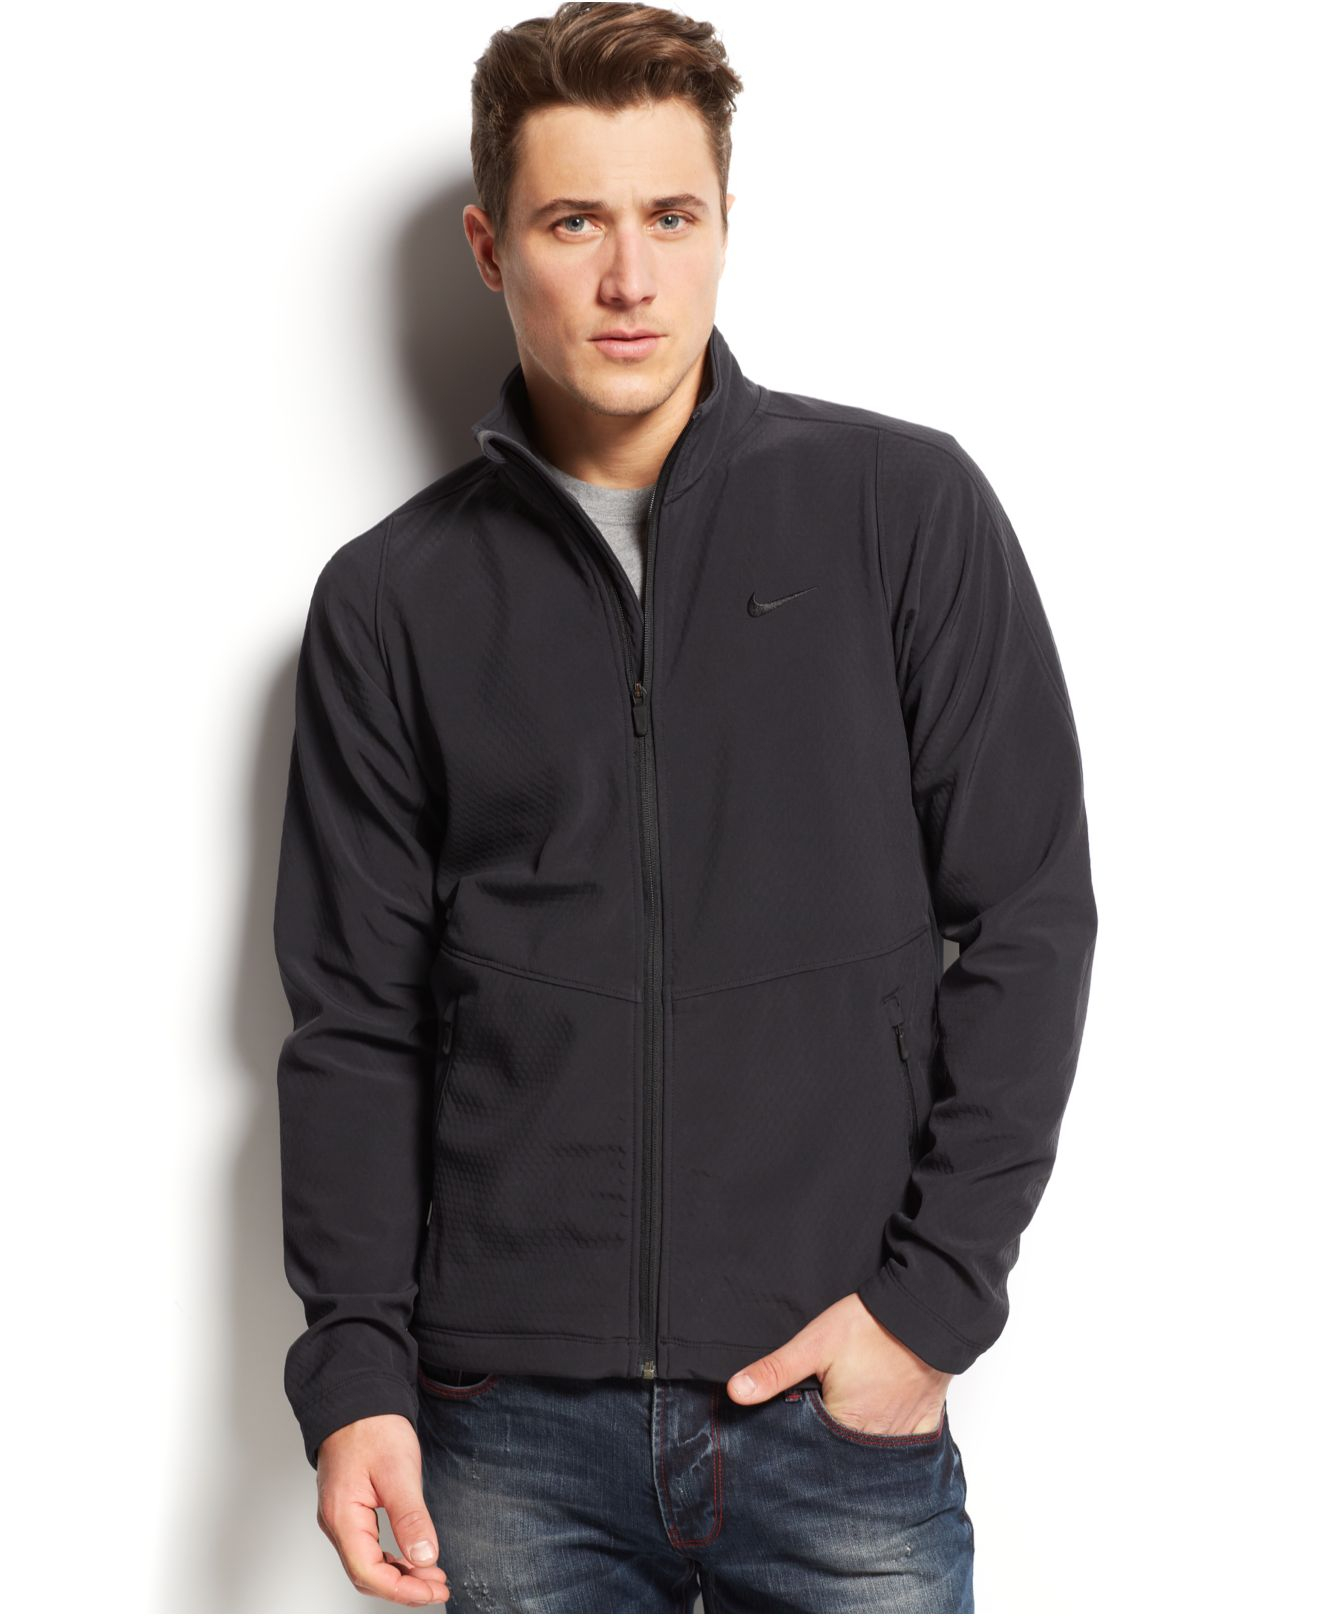 Nike Max Softshell Jacket in Black for Men - Lyst